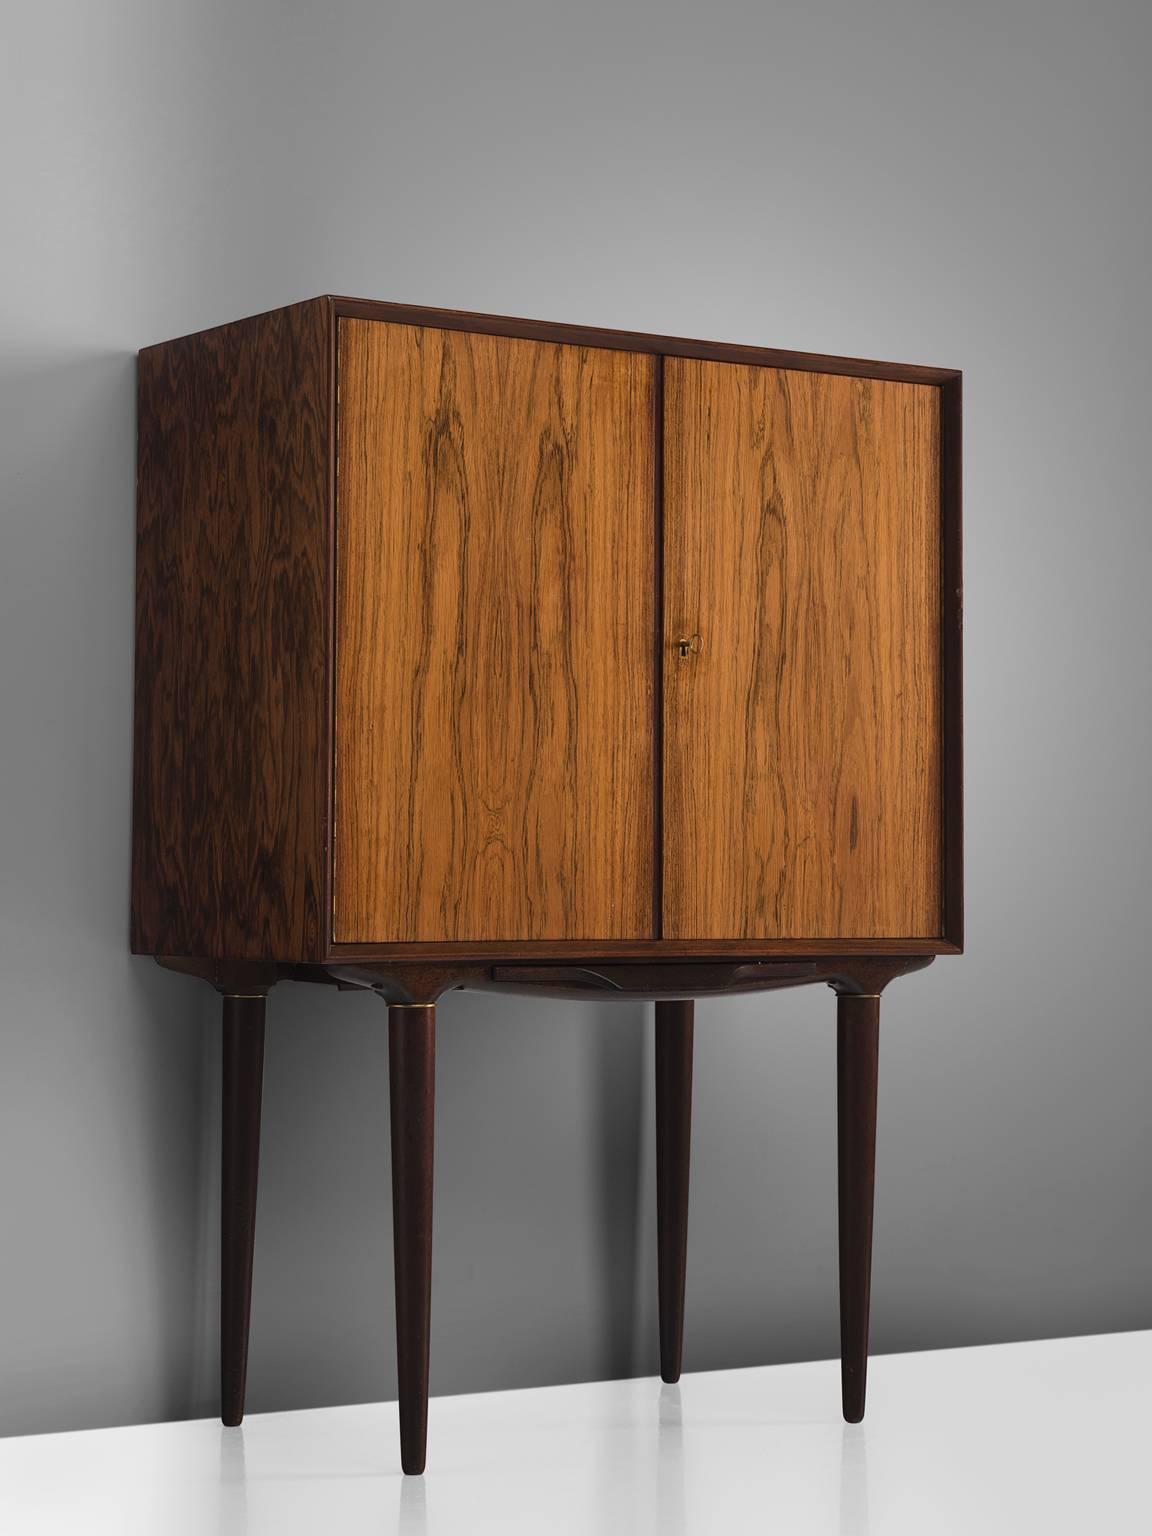 Illum Wikkelsø for C.F. Christensen, rosewood, brass, glass, mirror, Denmark, 1960s.

This elegant high-legged cabinet is designed by Illum Wikkelsø and produced by C. F. Christensen, Silkeborg. The dry bar features cabinet two doors with a key.